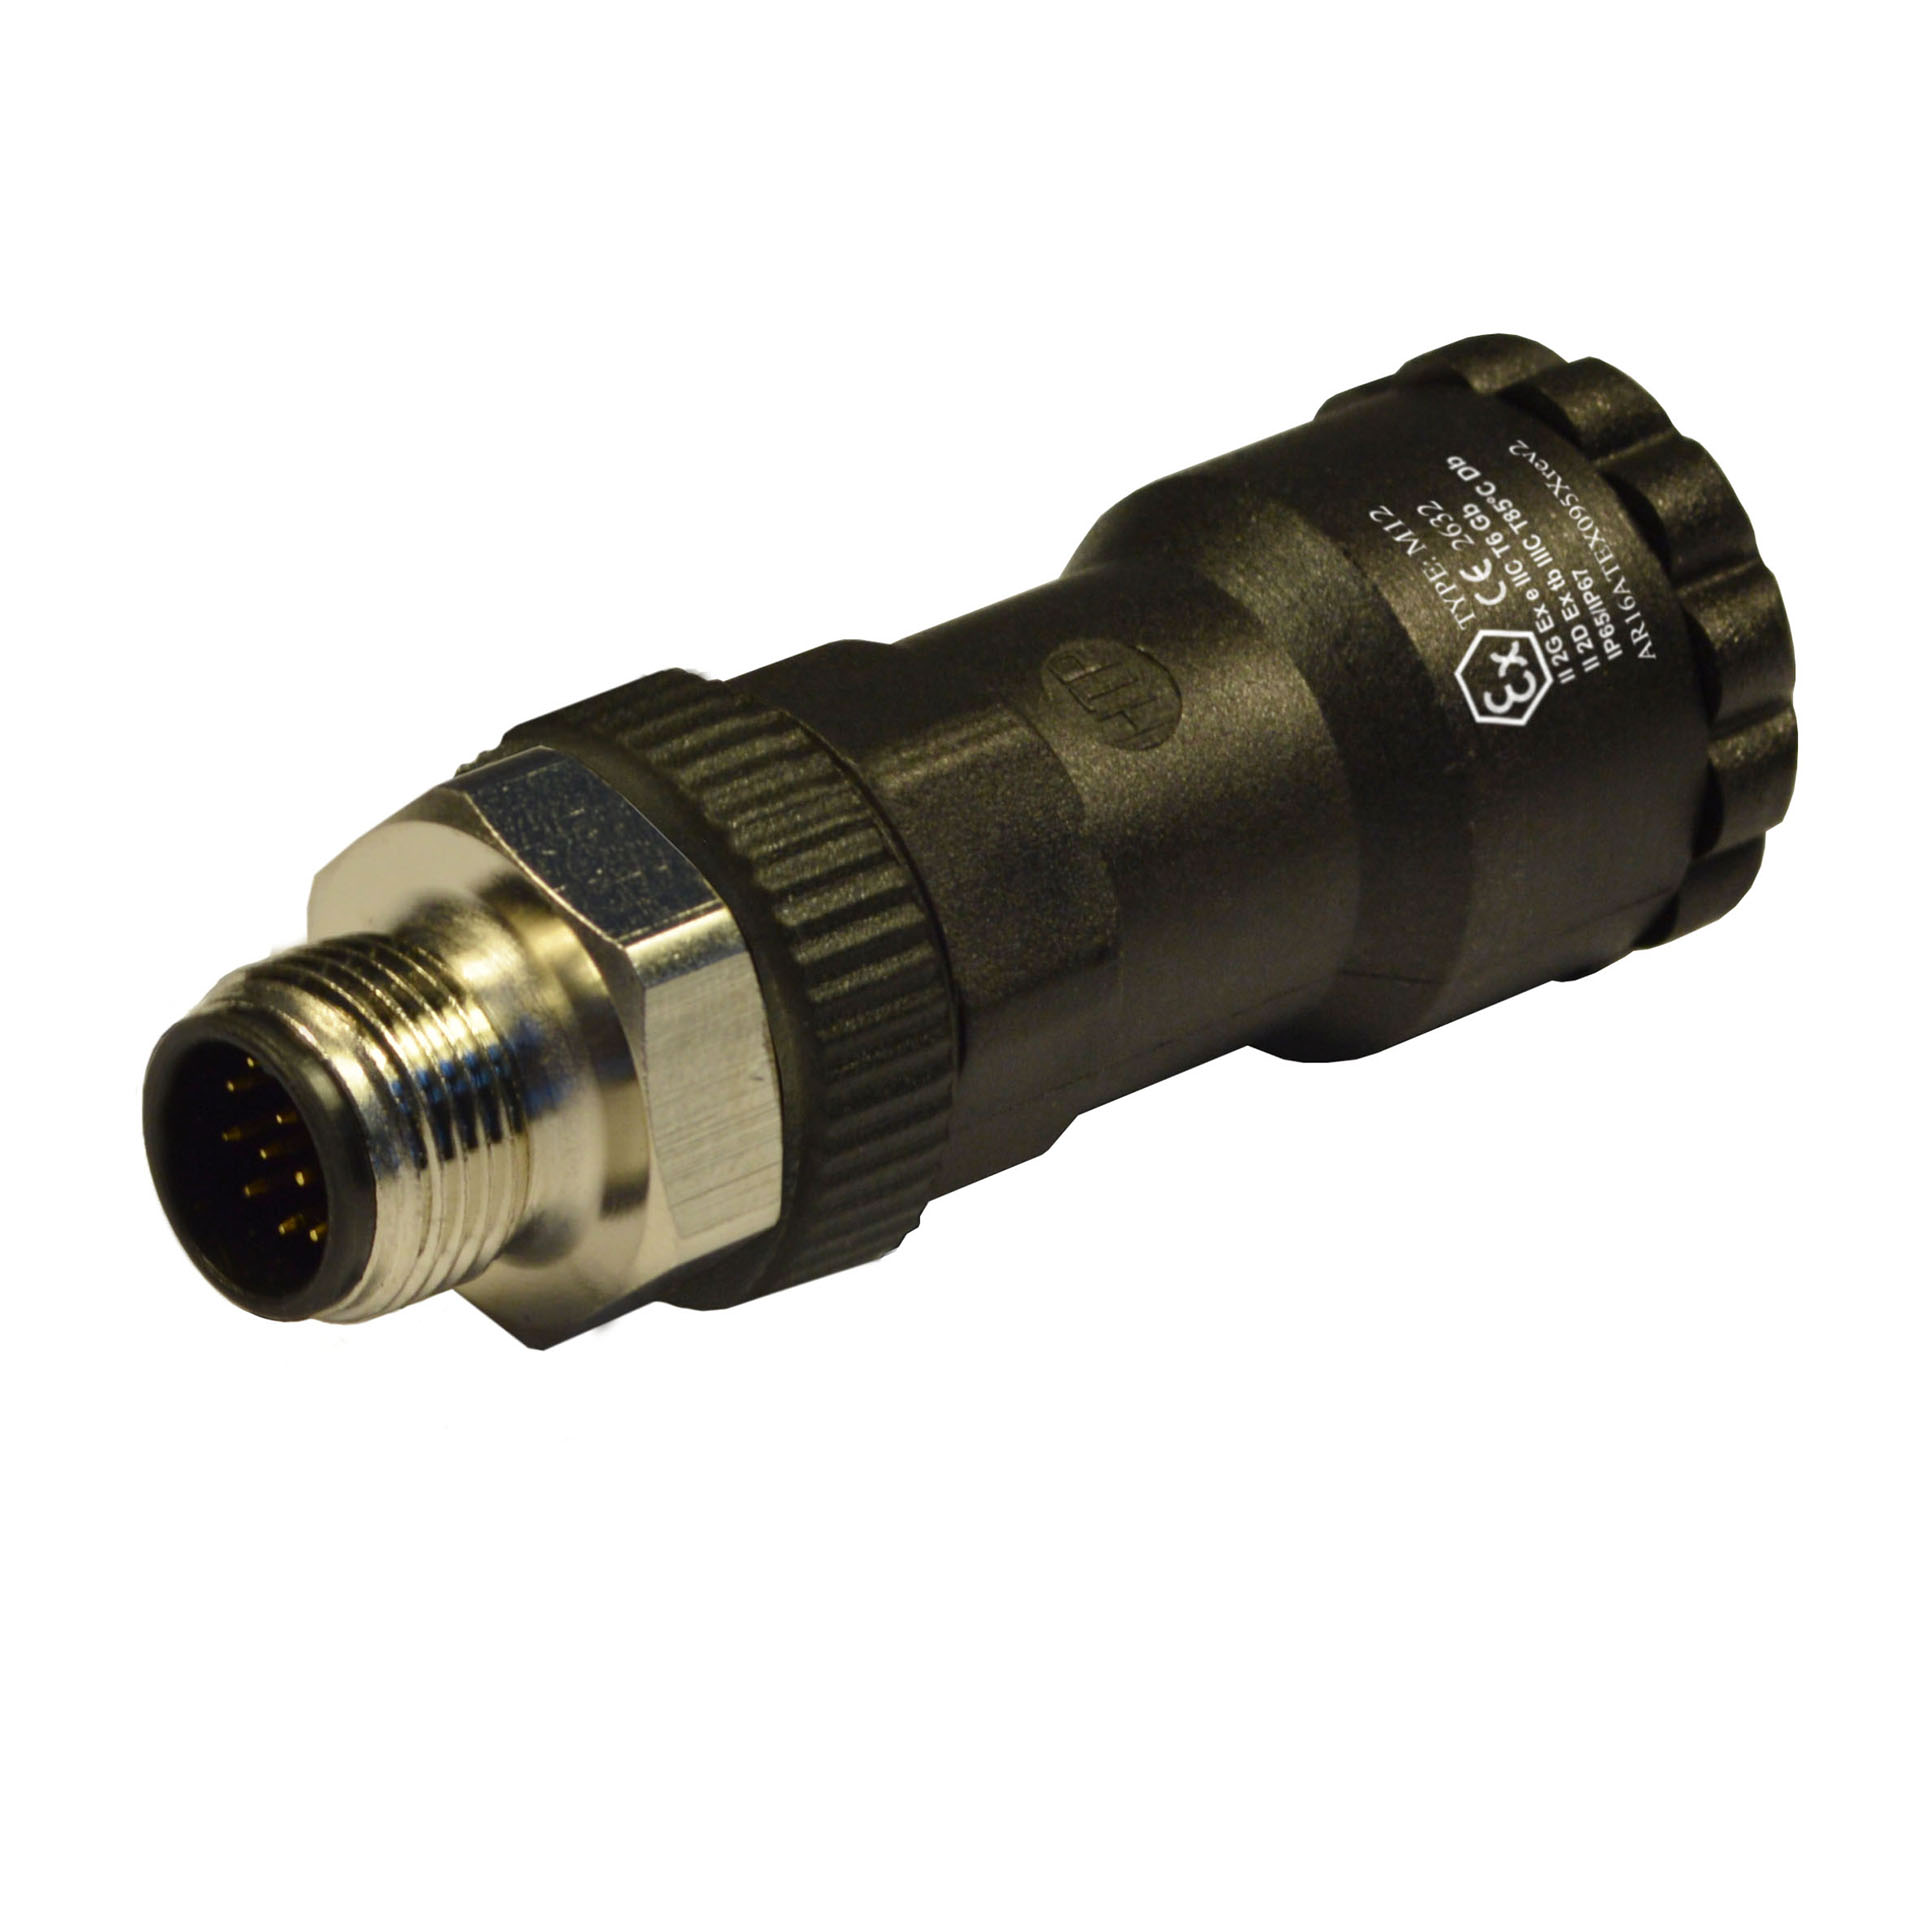 M12 field attachable,male,180°,12p.,PG9/11unif.or double exit cable,ATEX conform